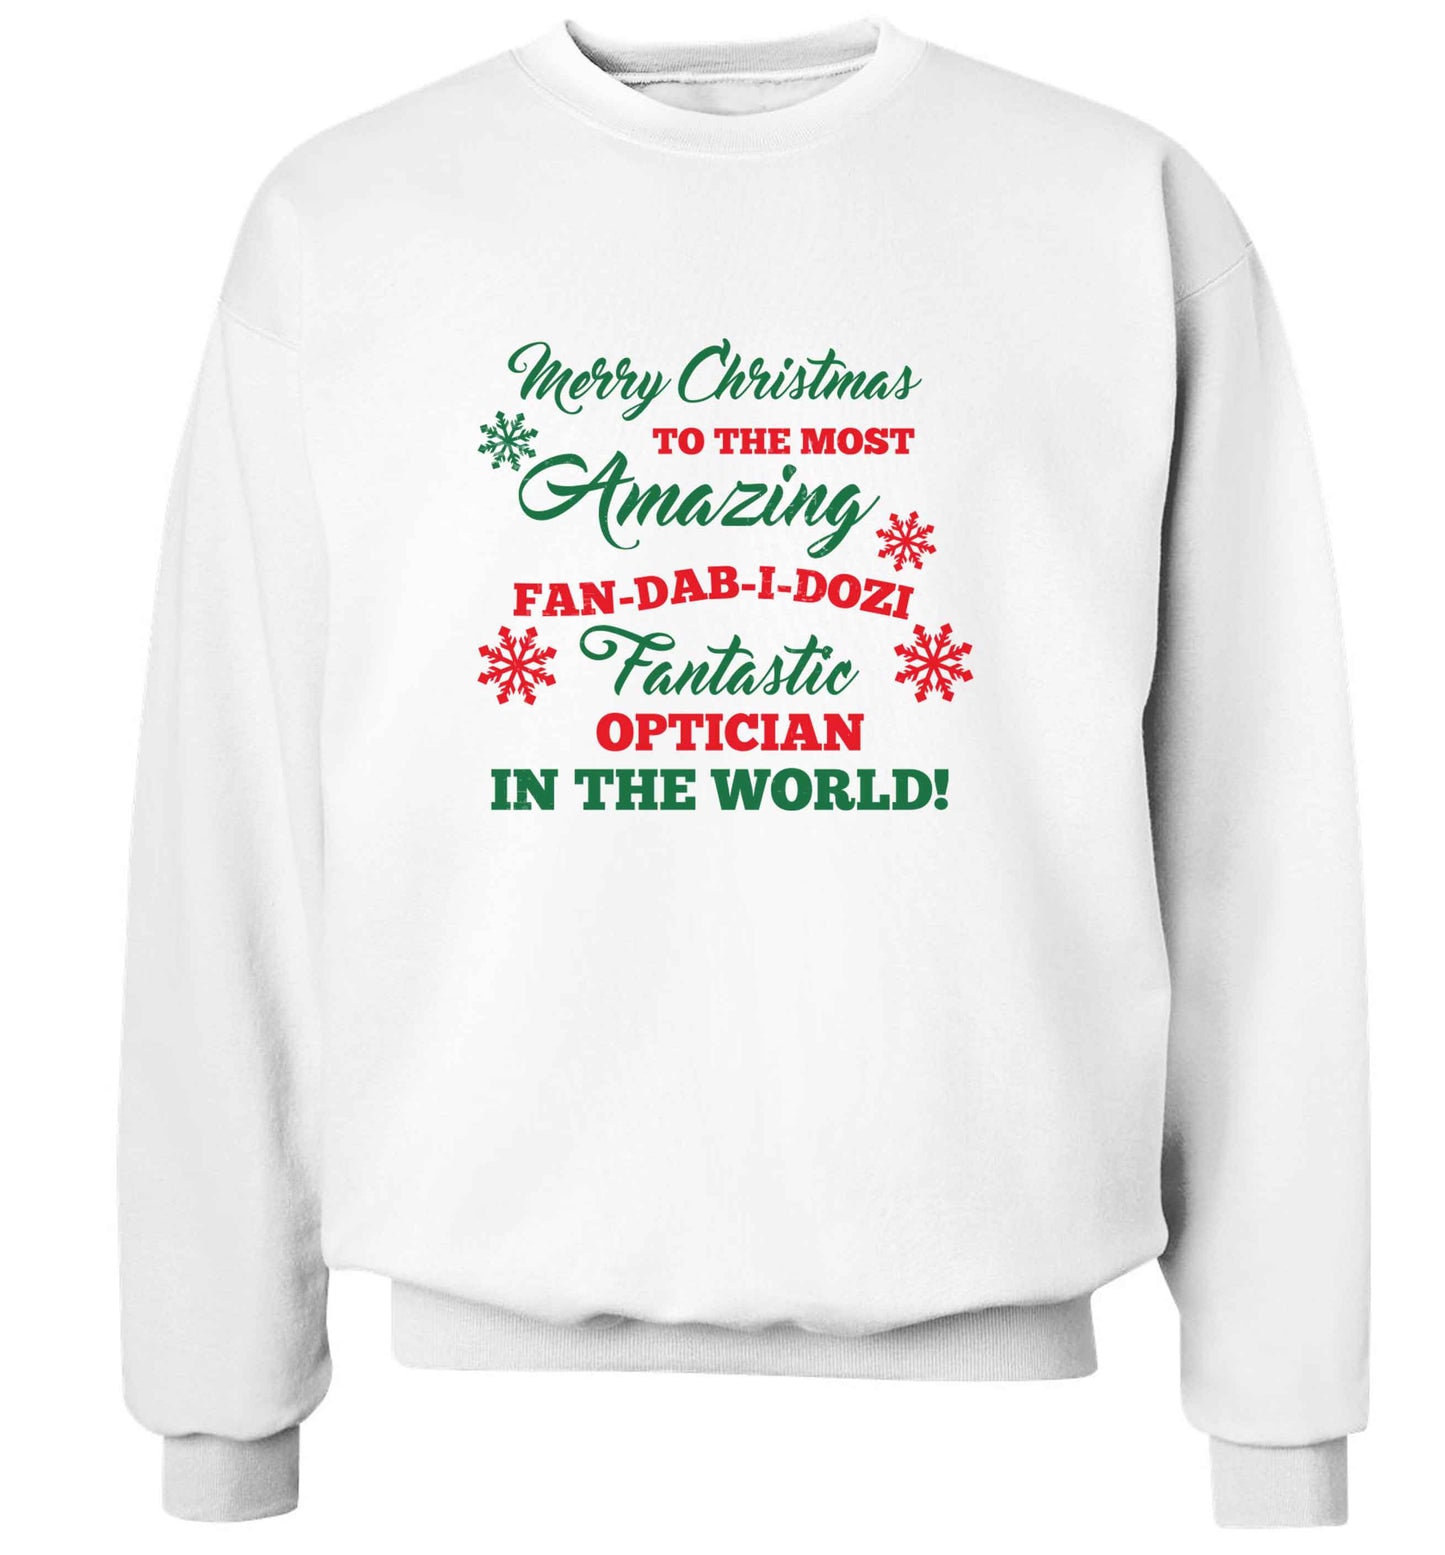 Merry Christmas to the most amazing optician in the world! adult's unisex white sweater 2XL